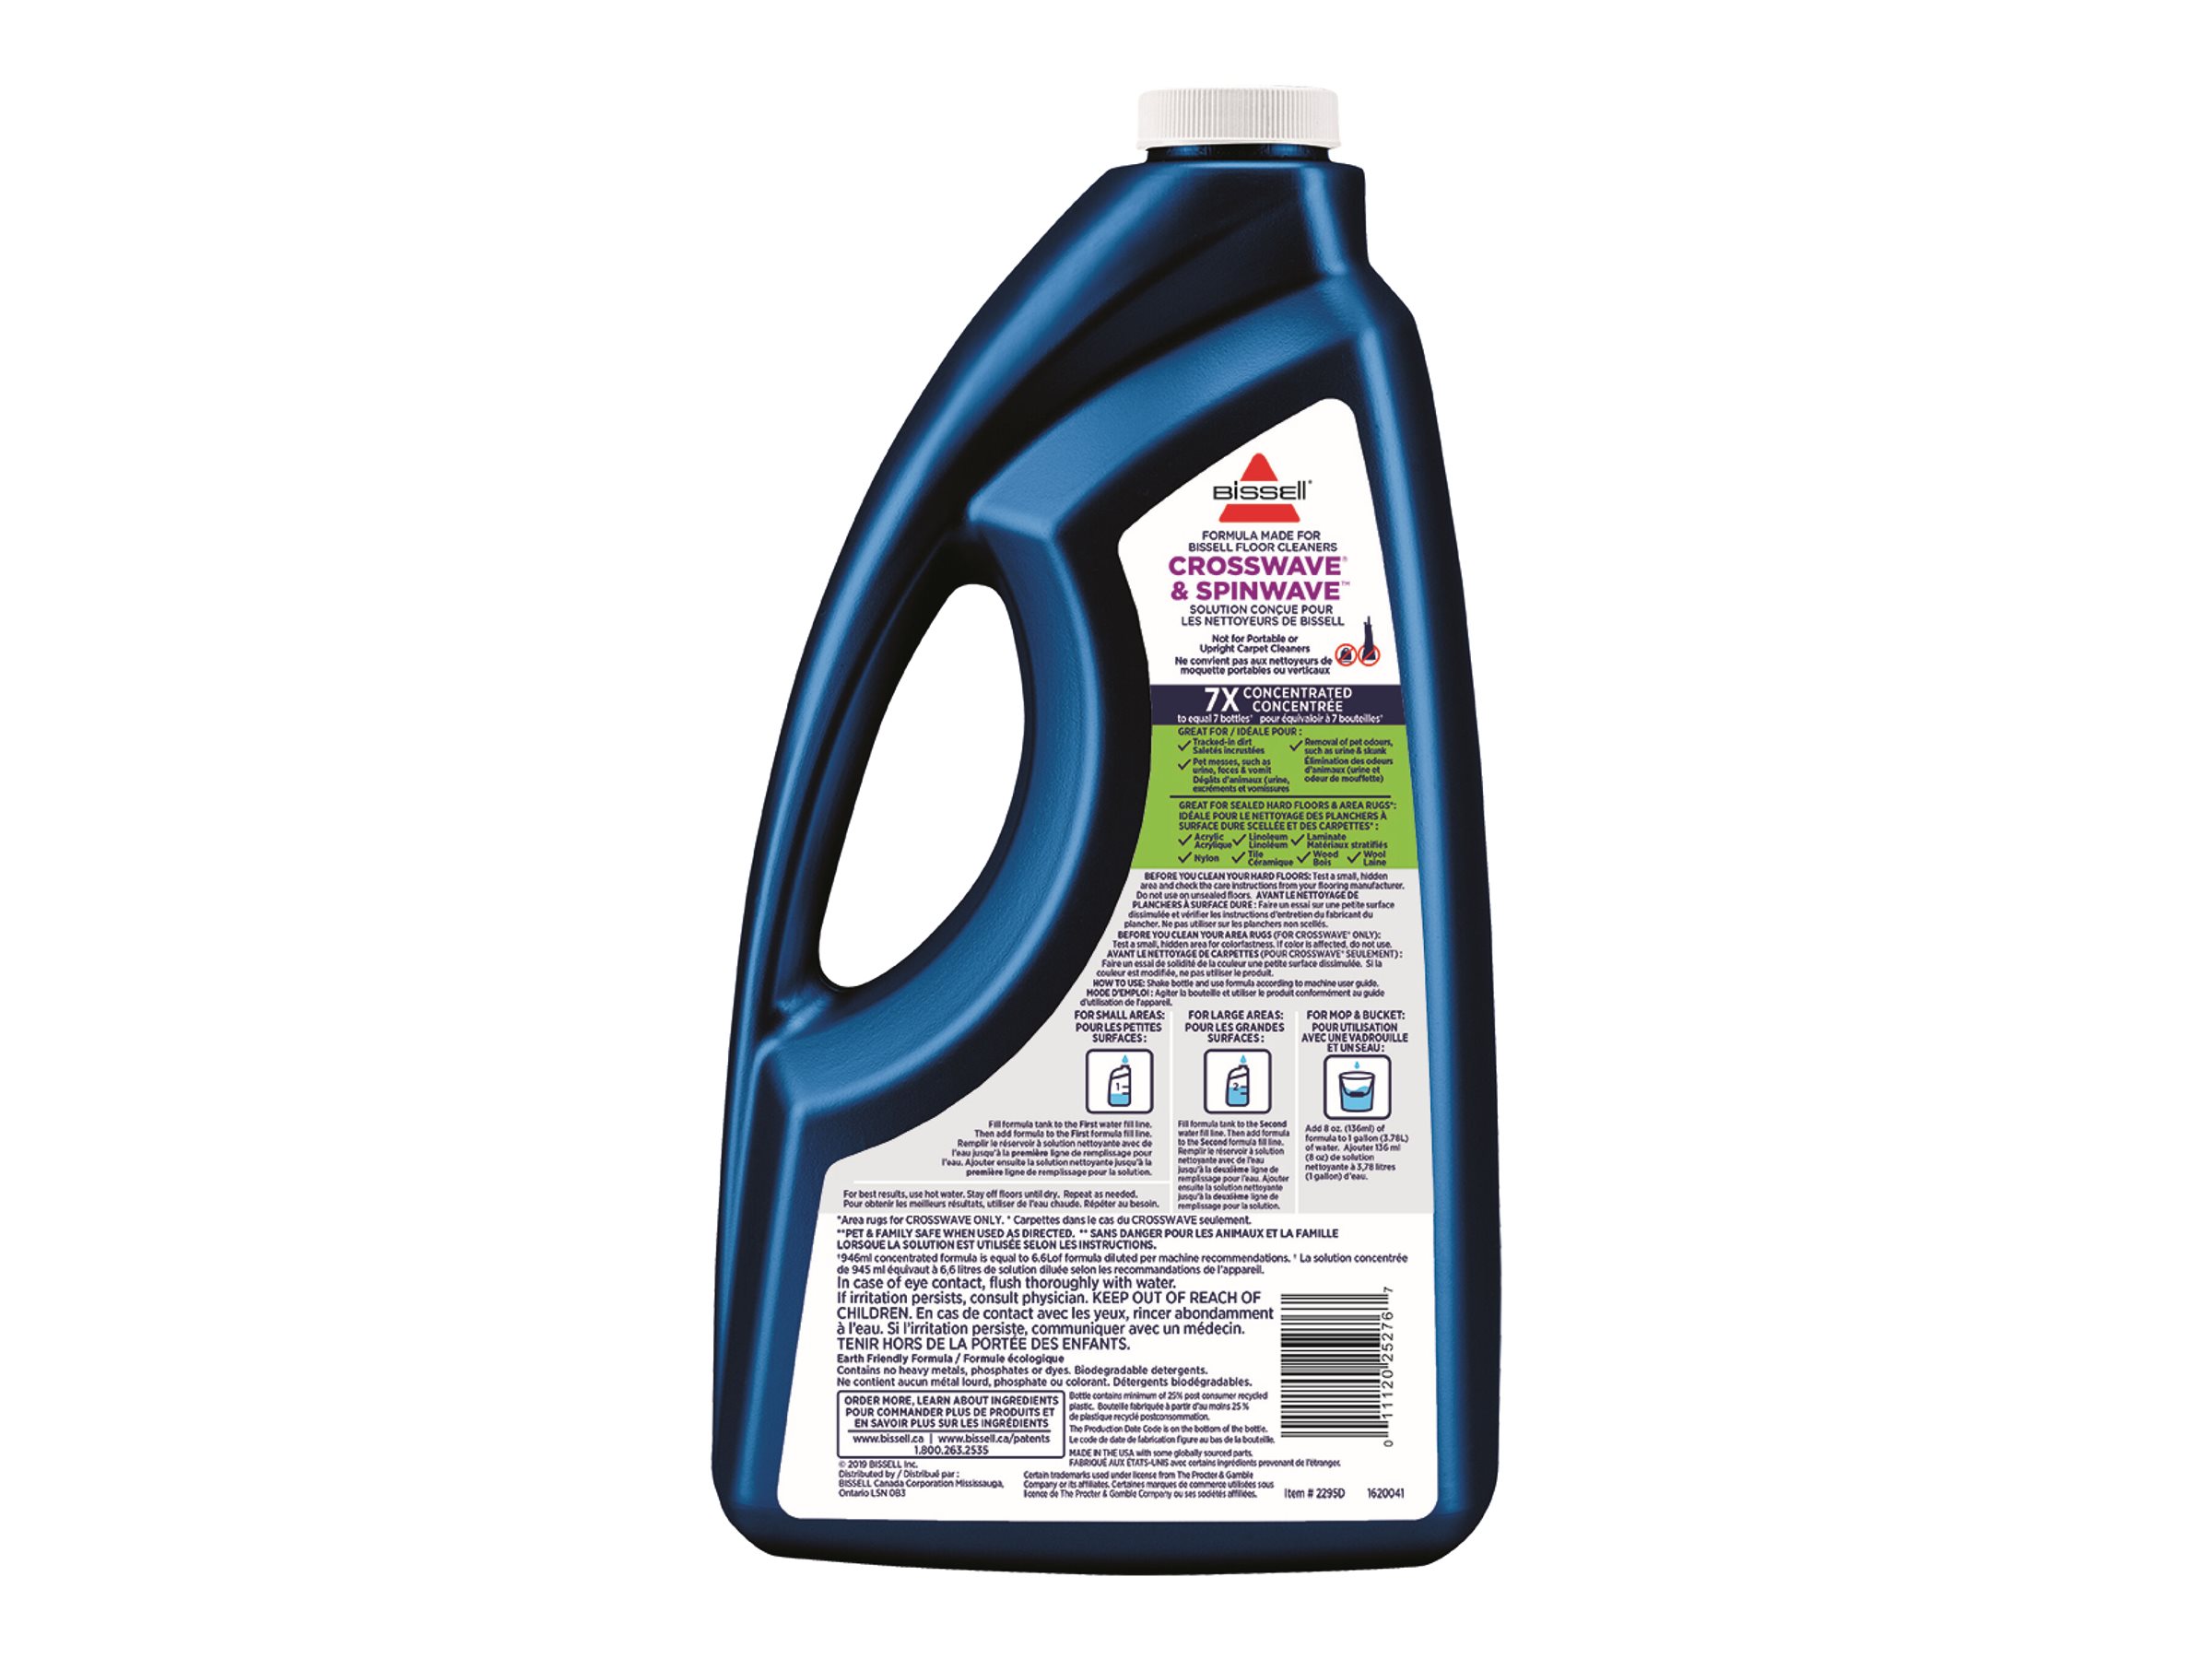 BISSELL Pet Multi-Surface Floor Cleaner - 1.89L